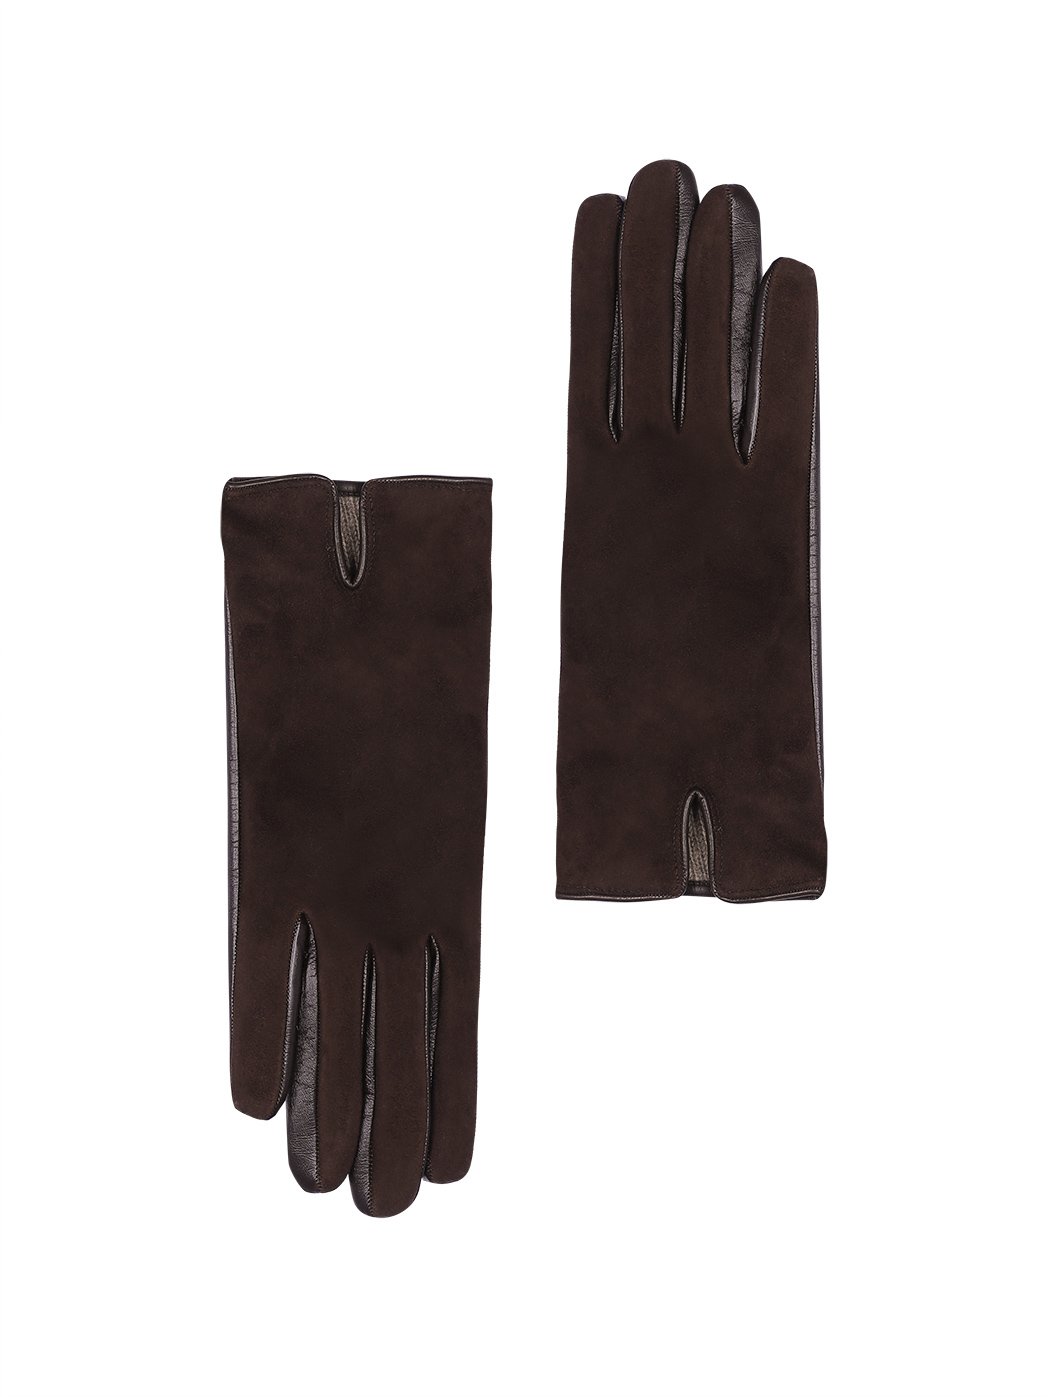 Women's Touchscreen Gloves in Leather Brown